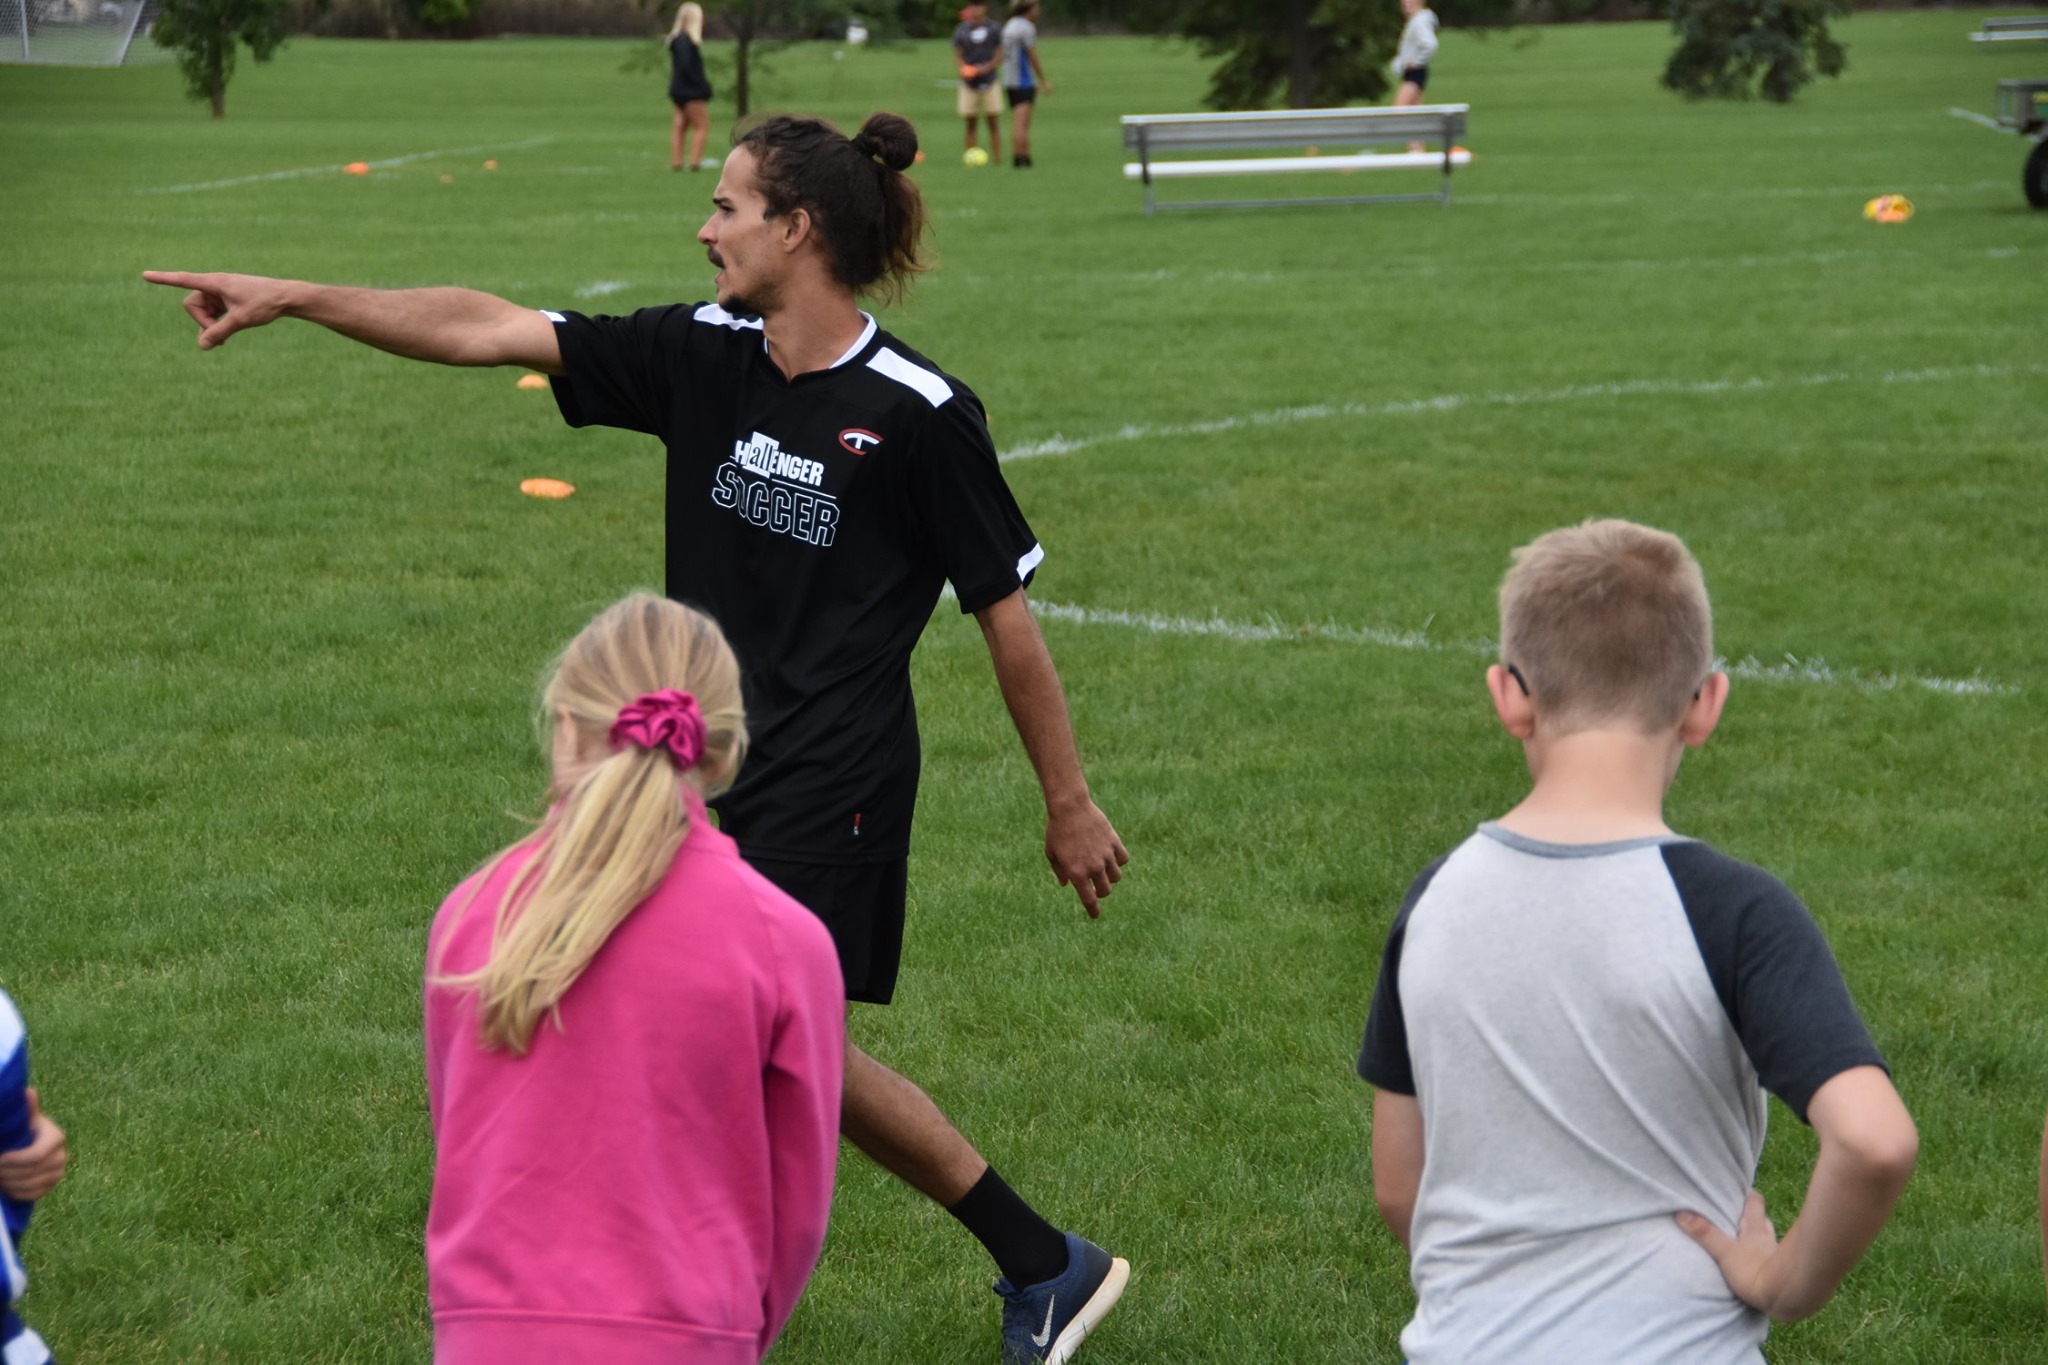 Challenger International Soccer Camp Coming to Fond du Lac